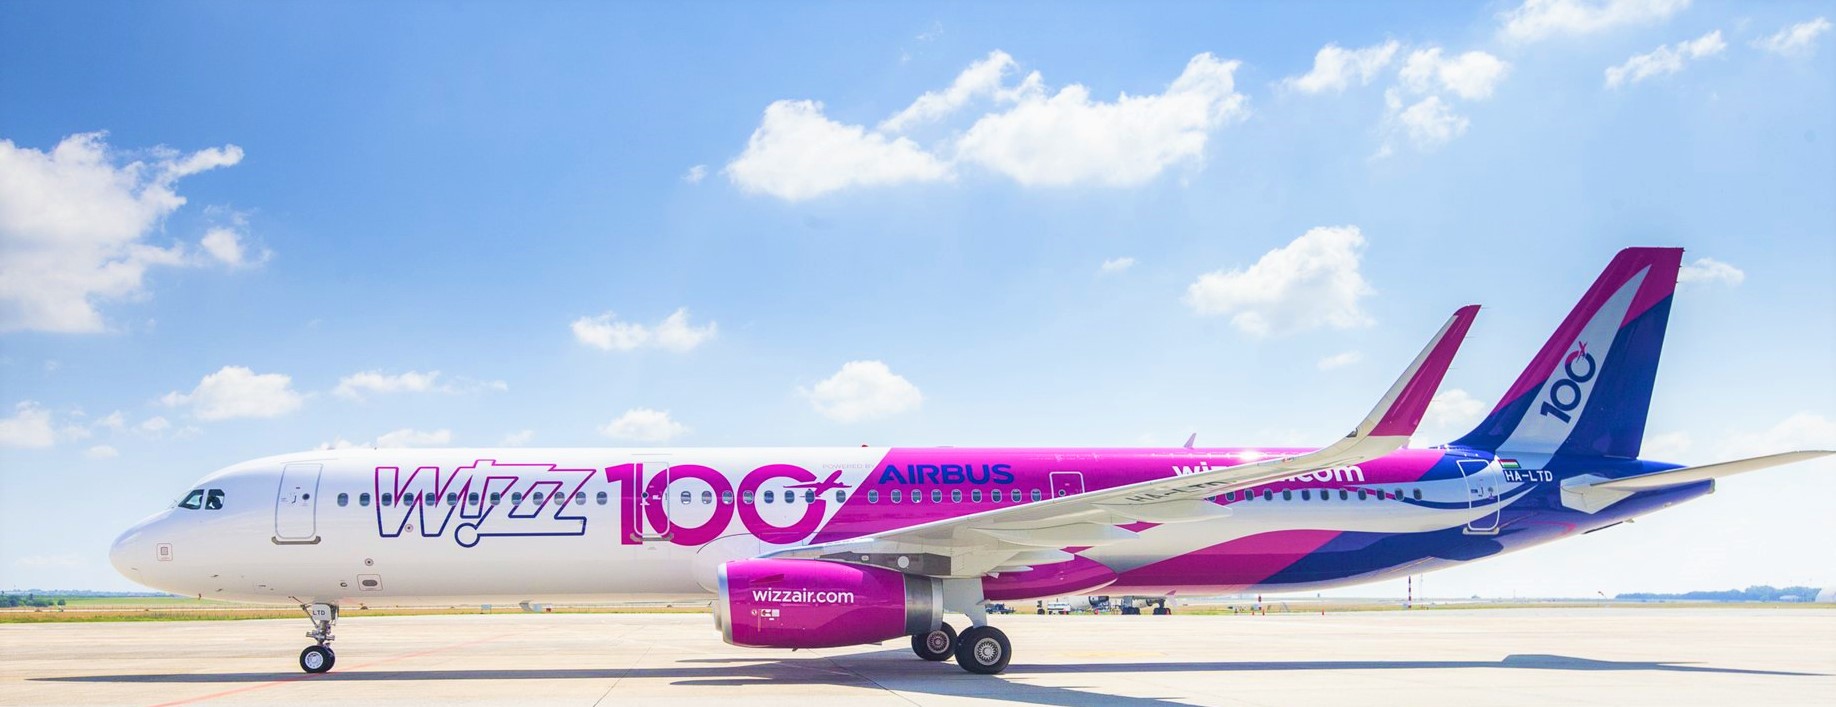 Wizz Air has replaced its flight operations chief after his  role  was  found  questionable  in  redundancies  favouring  the 